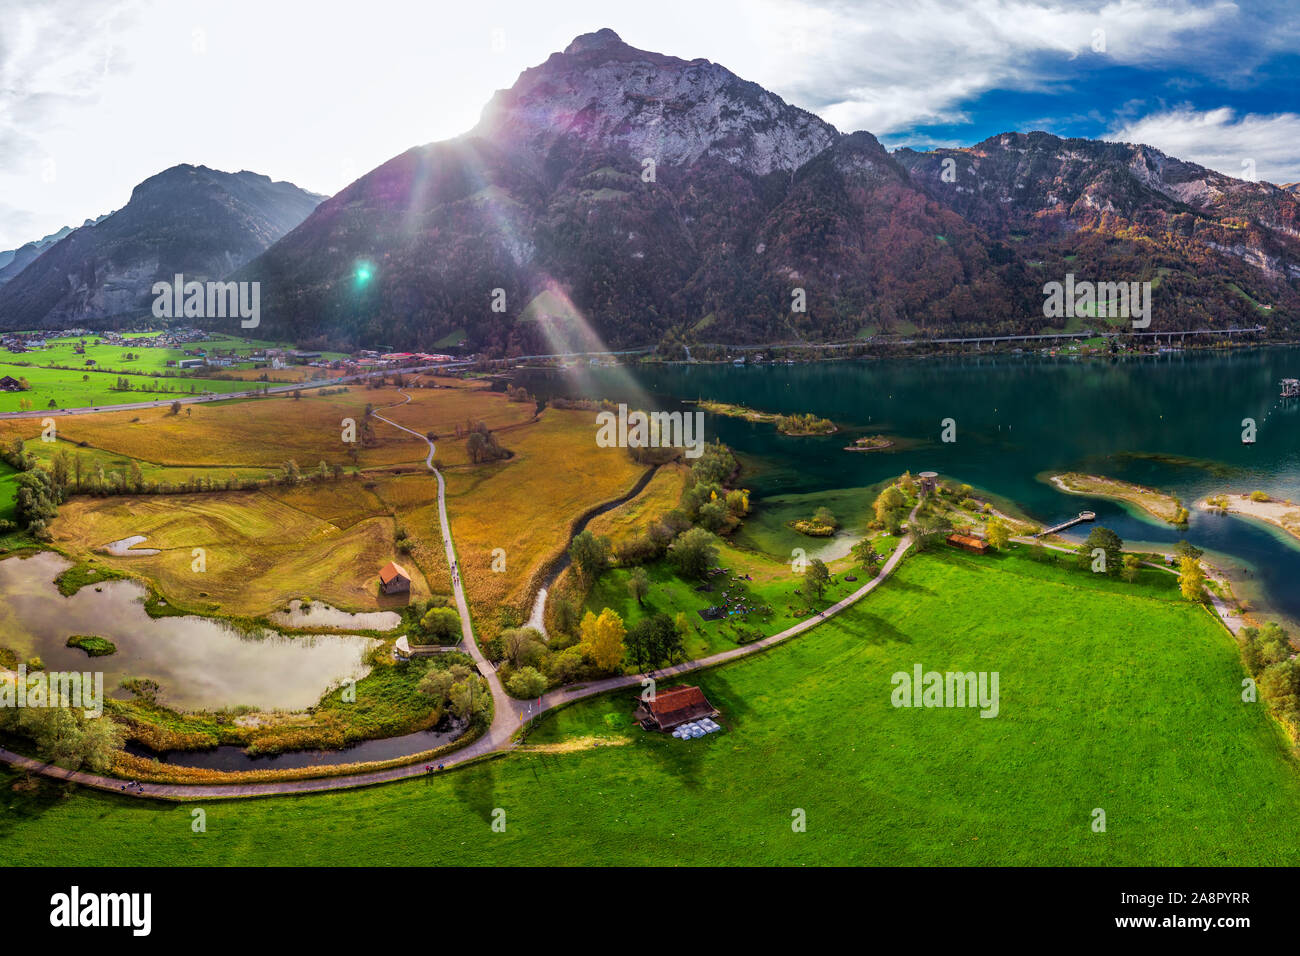 Areal view of Fluelen town and lake Lucerne in canton Uri, Switzerland, Europe. Stock Photo